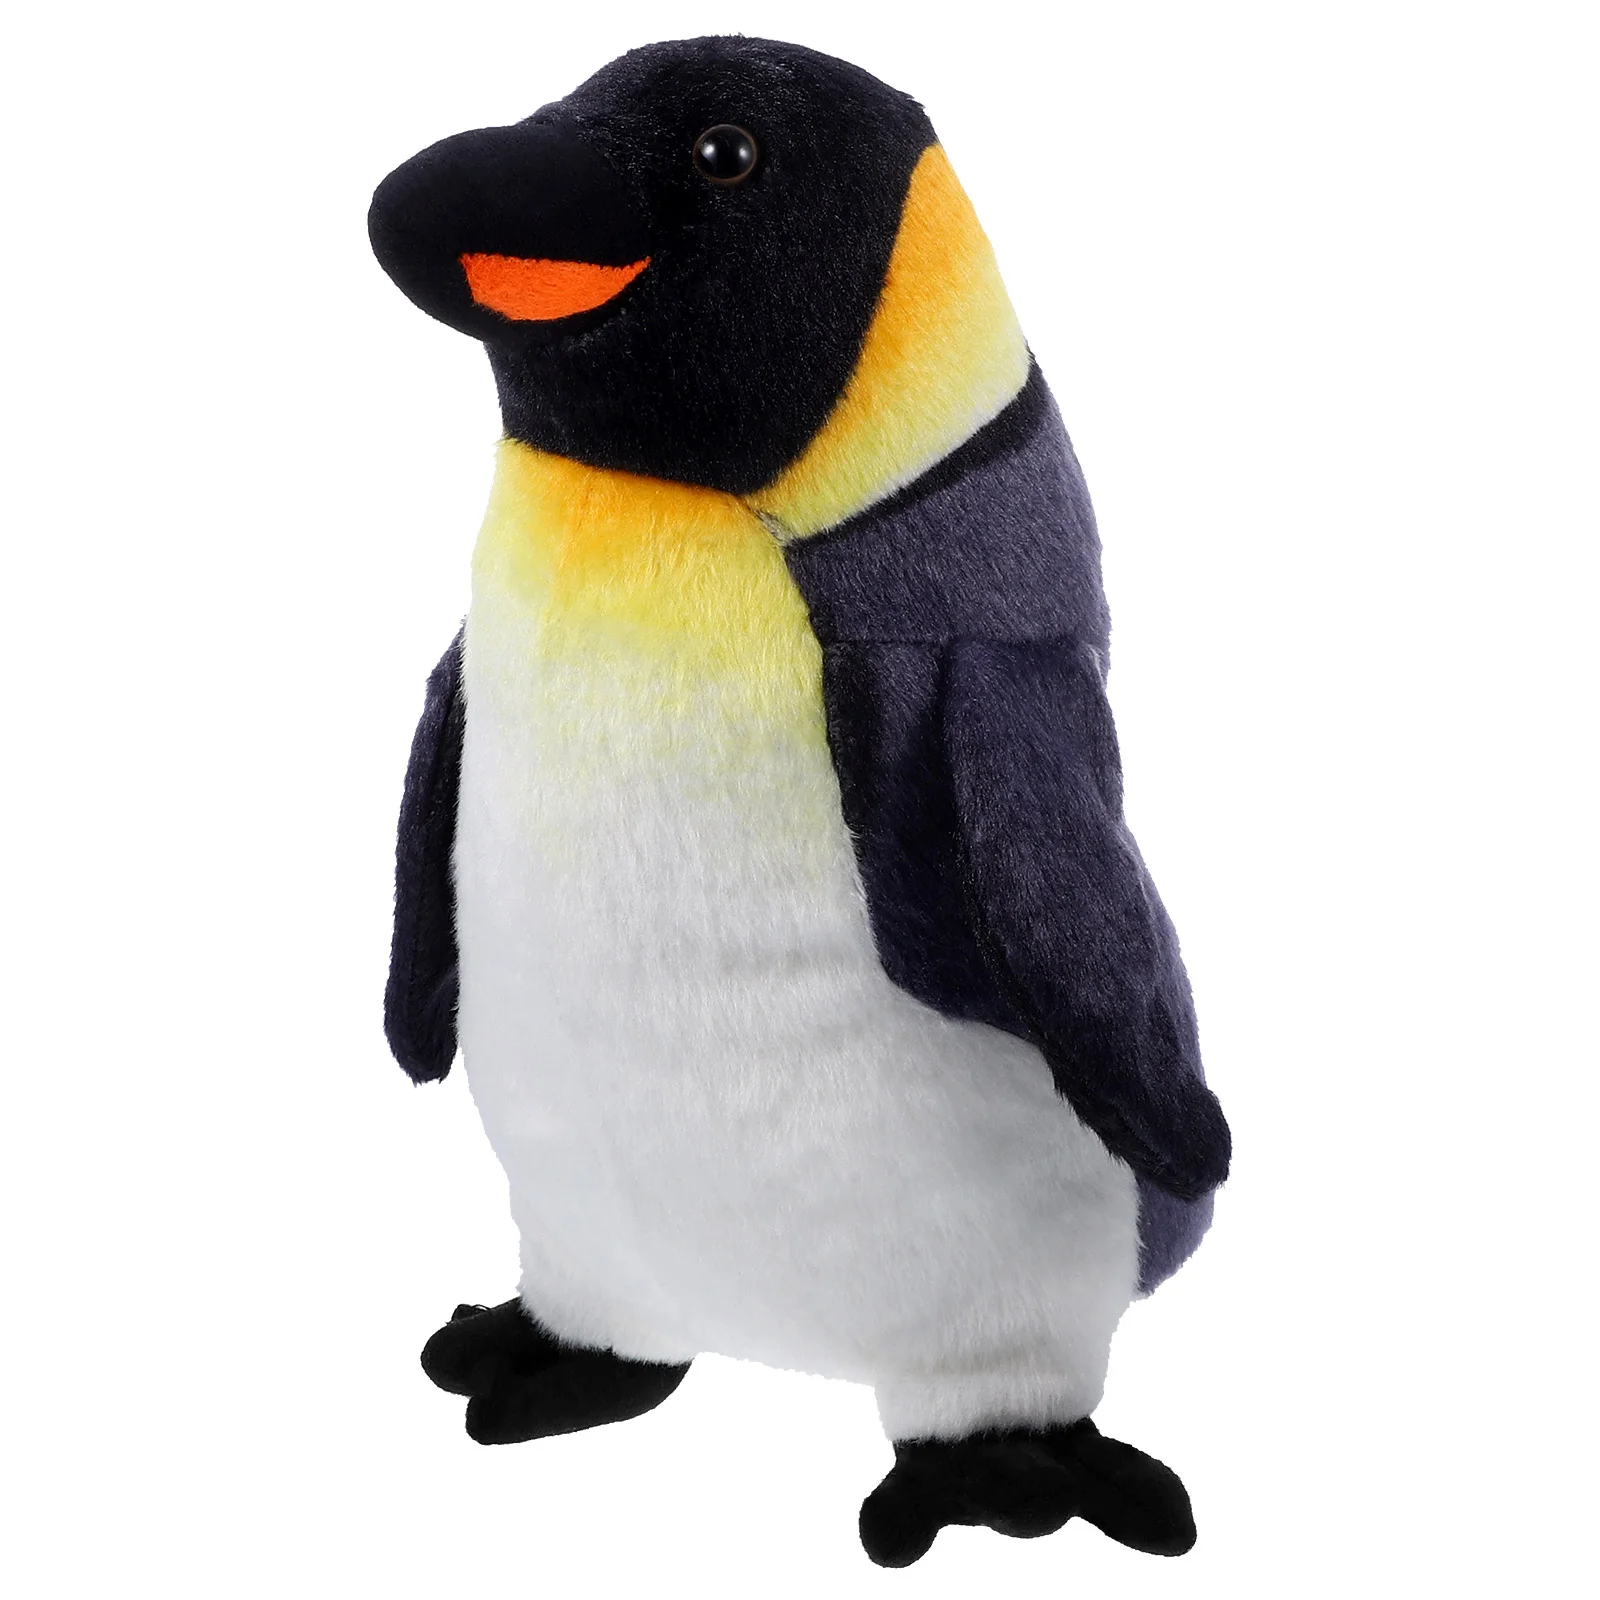 Fake Plush Penguin Toy Simulated Funny Marine Animal Penguin Gift for Kid (35cm) dog coffee set dress up ear headband kids suit case animal tail gloves fabric cosplay tutu skirt fake nose child role outfits